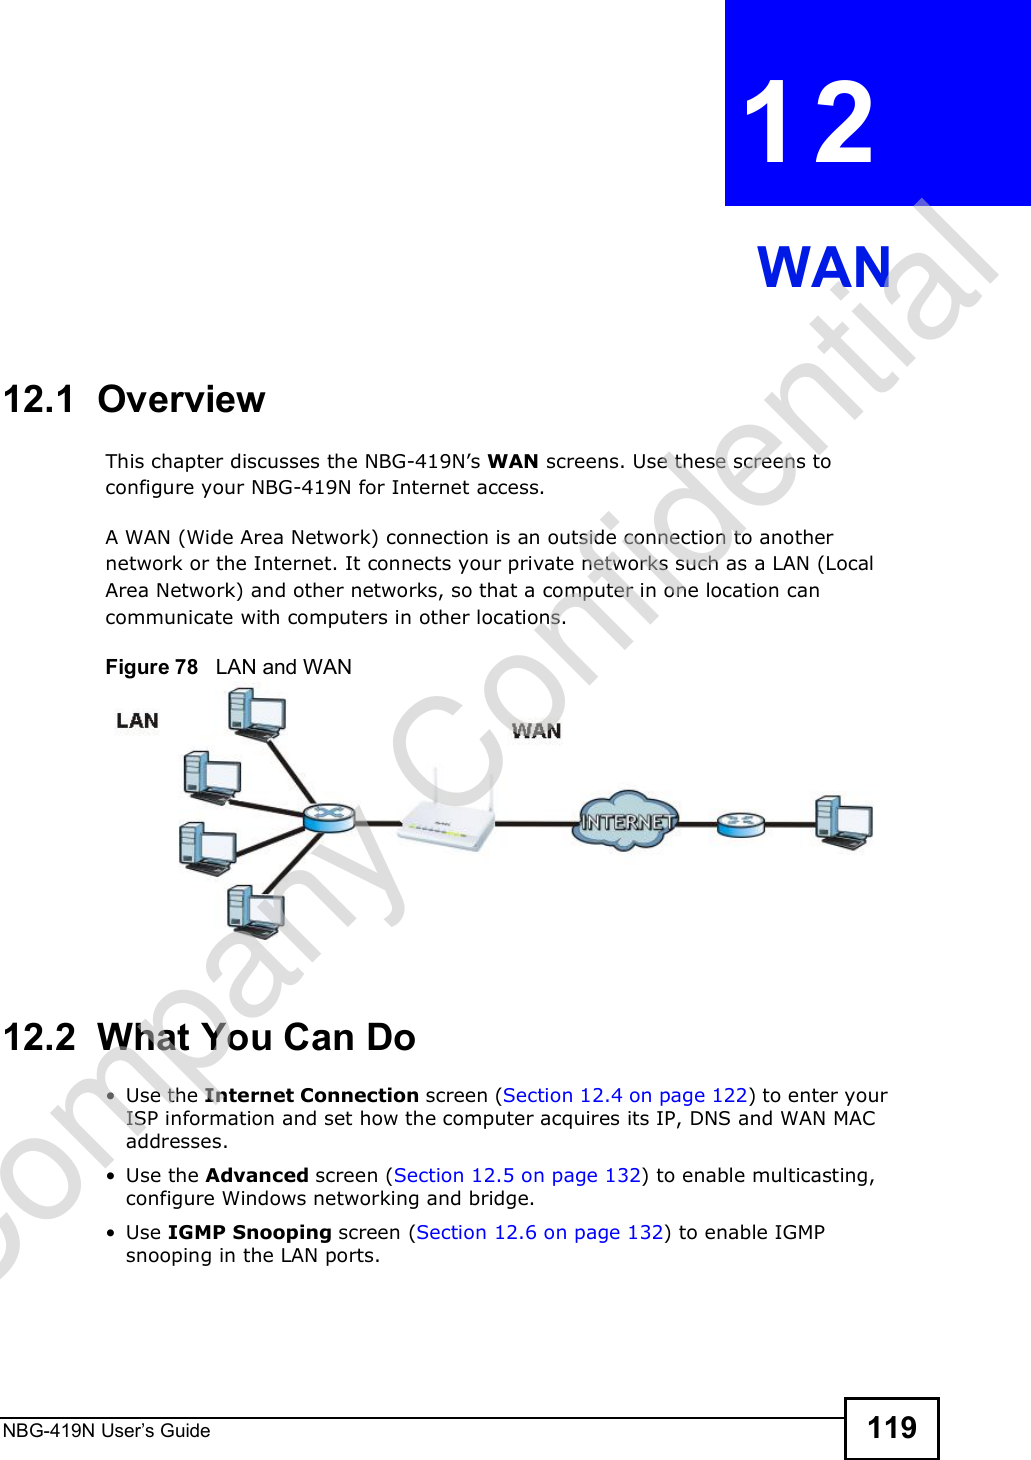 NBG-419N User s Guide 119CHAPTER  12 WAN12.1  OverviewThis chapter discusses the NBG-419N!s WAN screens. Use these screens to configure your NBG-419N for Internet access.A WAN (Wide Area Network) connection is an outside connection to another network or the Internet. It connects your private networks such as a LAN (Local Area Network) and other networks, so that a computer in one location can communicate with computers in other locations.Figure 78   LAN and WAN12.2  What You Can Do Use the Internet Connection screen (Section 12.4 on page 122) to enter your ISP information and set how the computer acquires its IP, DNS and WAN MAC addresses. Use the Advanced screen (Section 12.5 on page 132) to enable multicasting, configure Windows networking and bridge. Use IGMP Snooping screen (Section 12.6 on page 132) to enable IGMP snooping in the LAN ports.Company Confidential